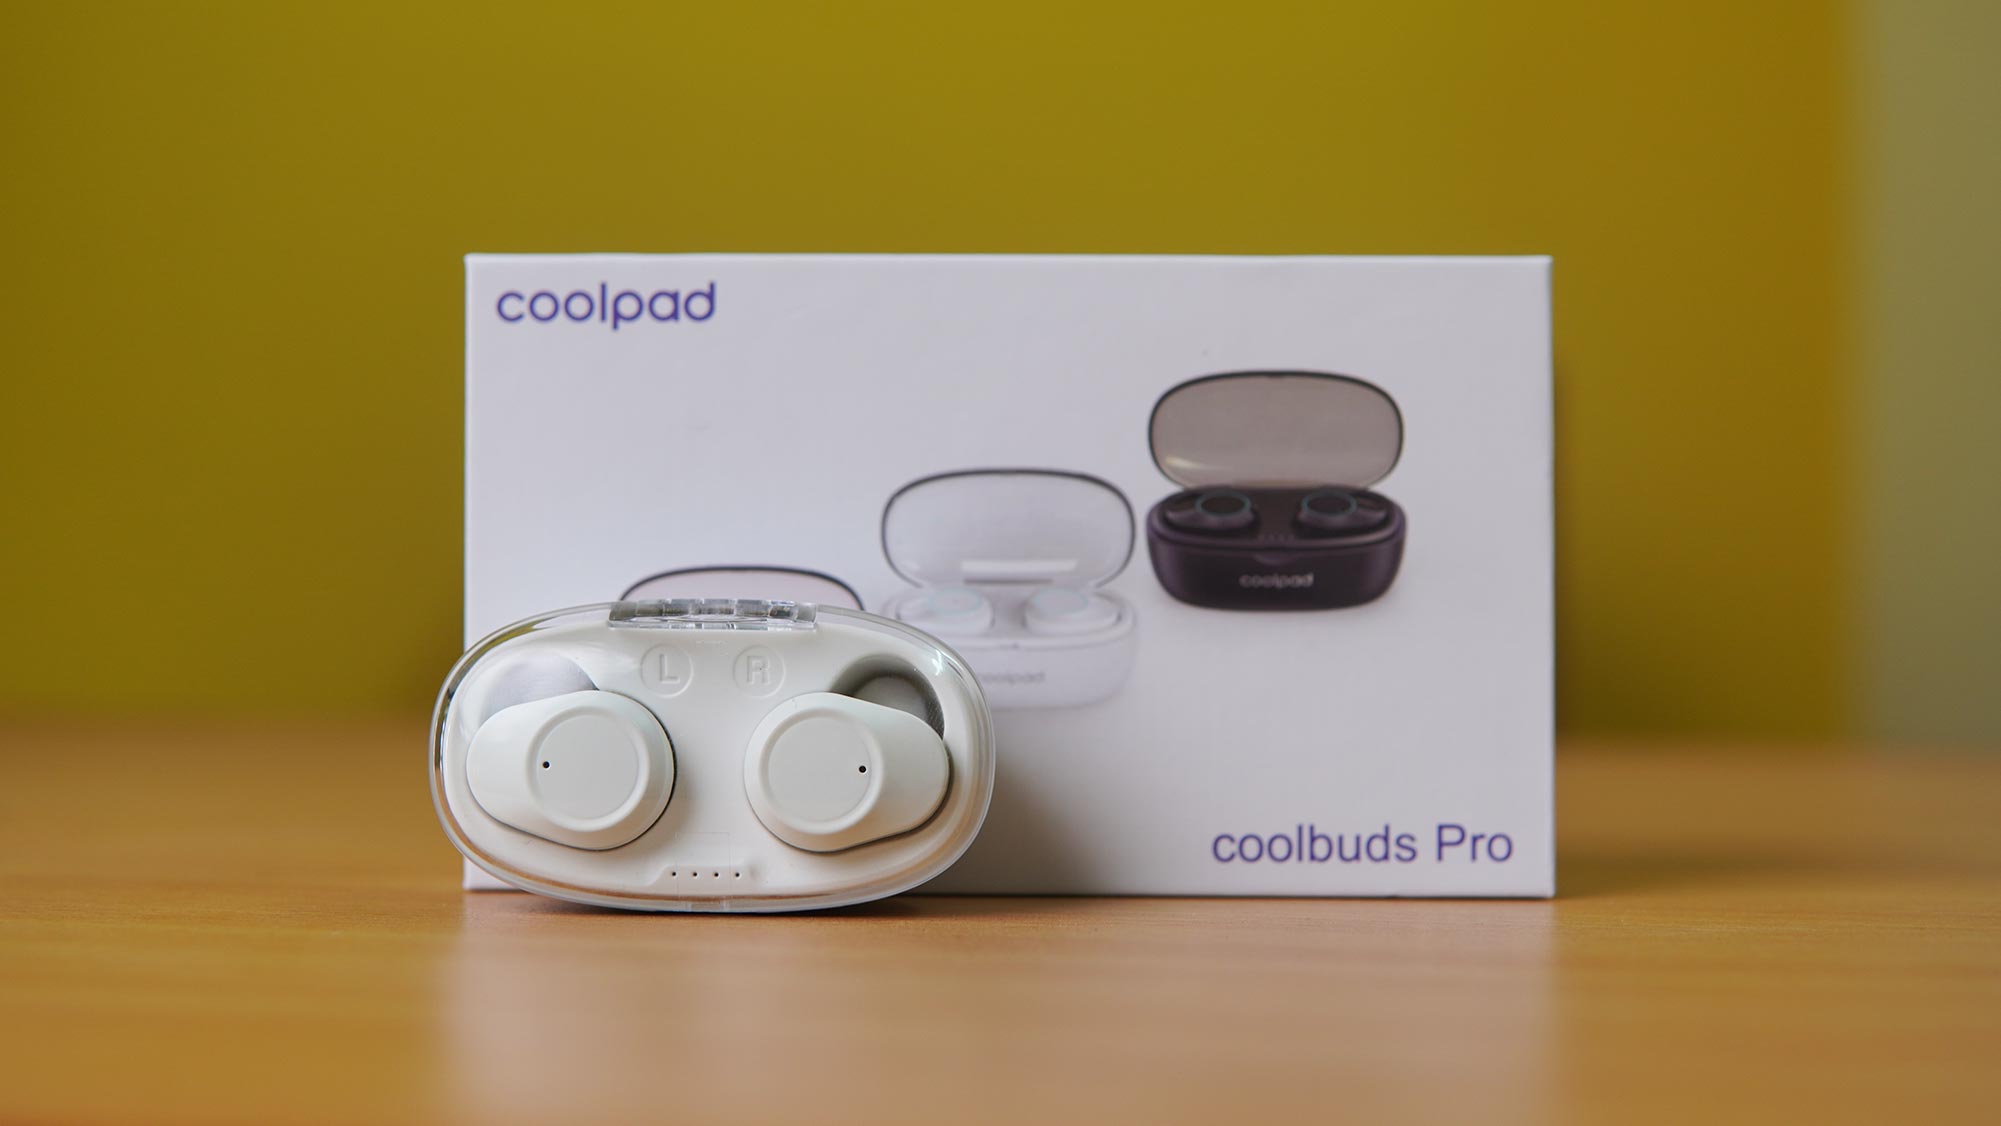 Coolpad Coolbuds Pro Price in Nepal